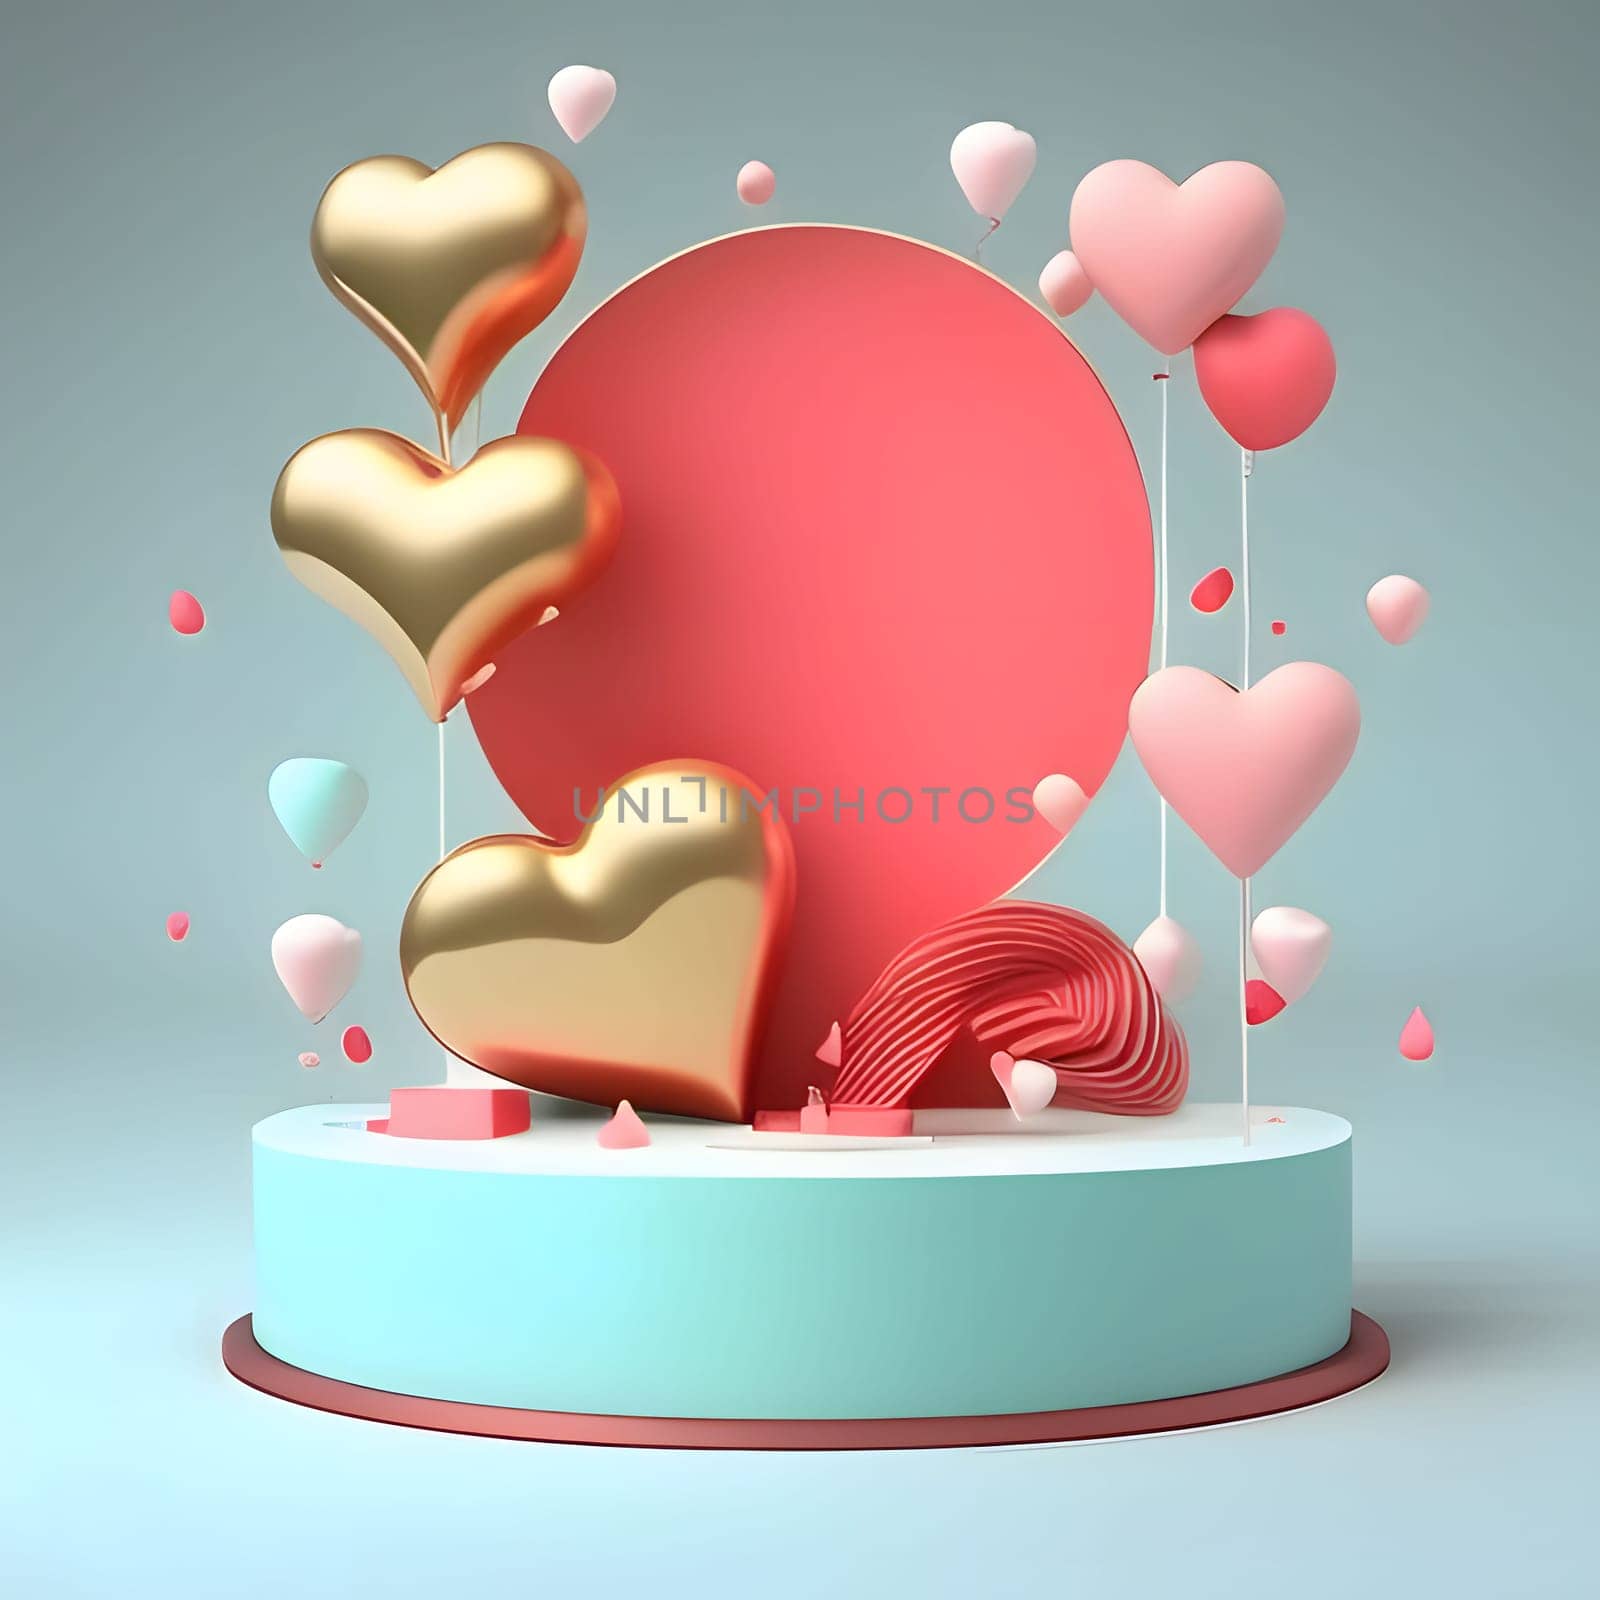 Colorful 3D hearts on a pink background in the middle, space in a circle for your own content. New Year's fun and festivities. A time of celebration and resolutions.